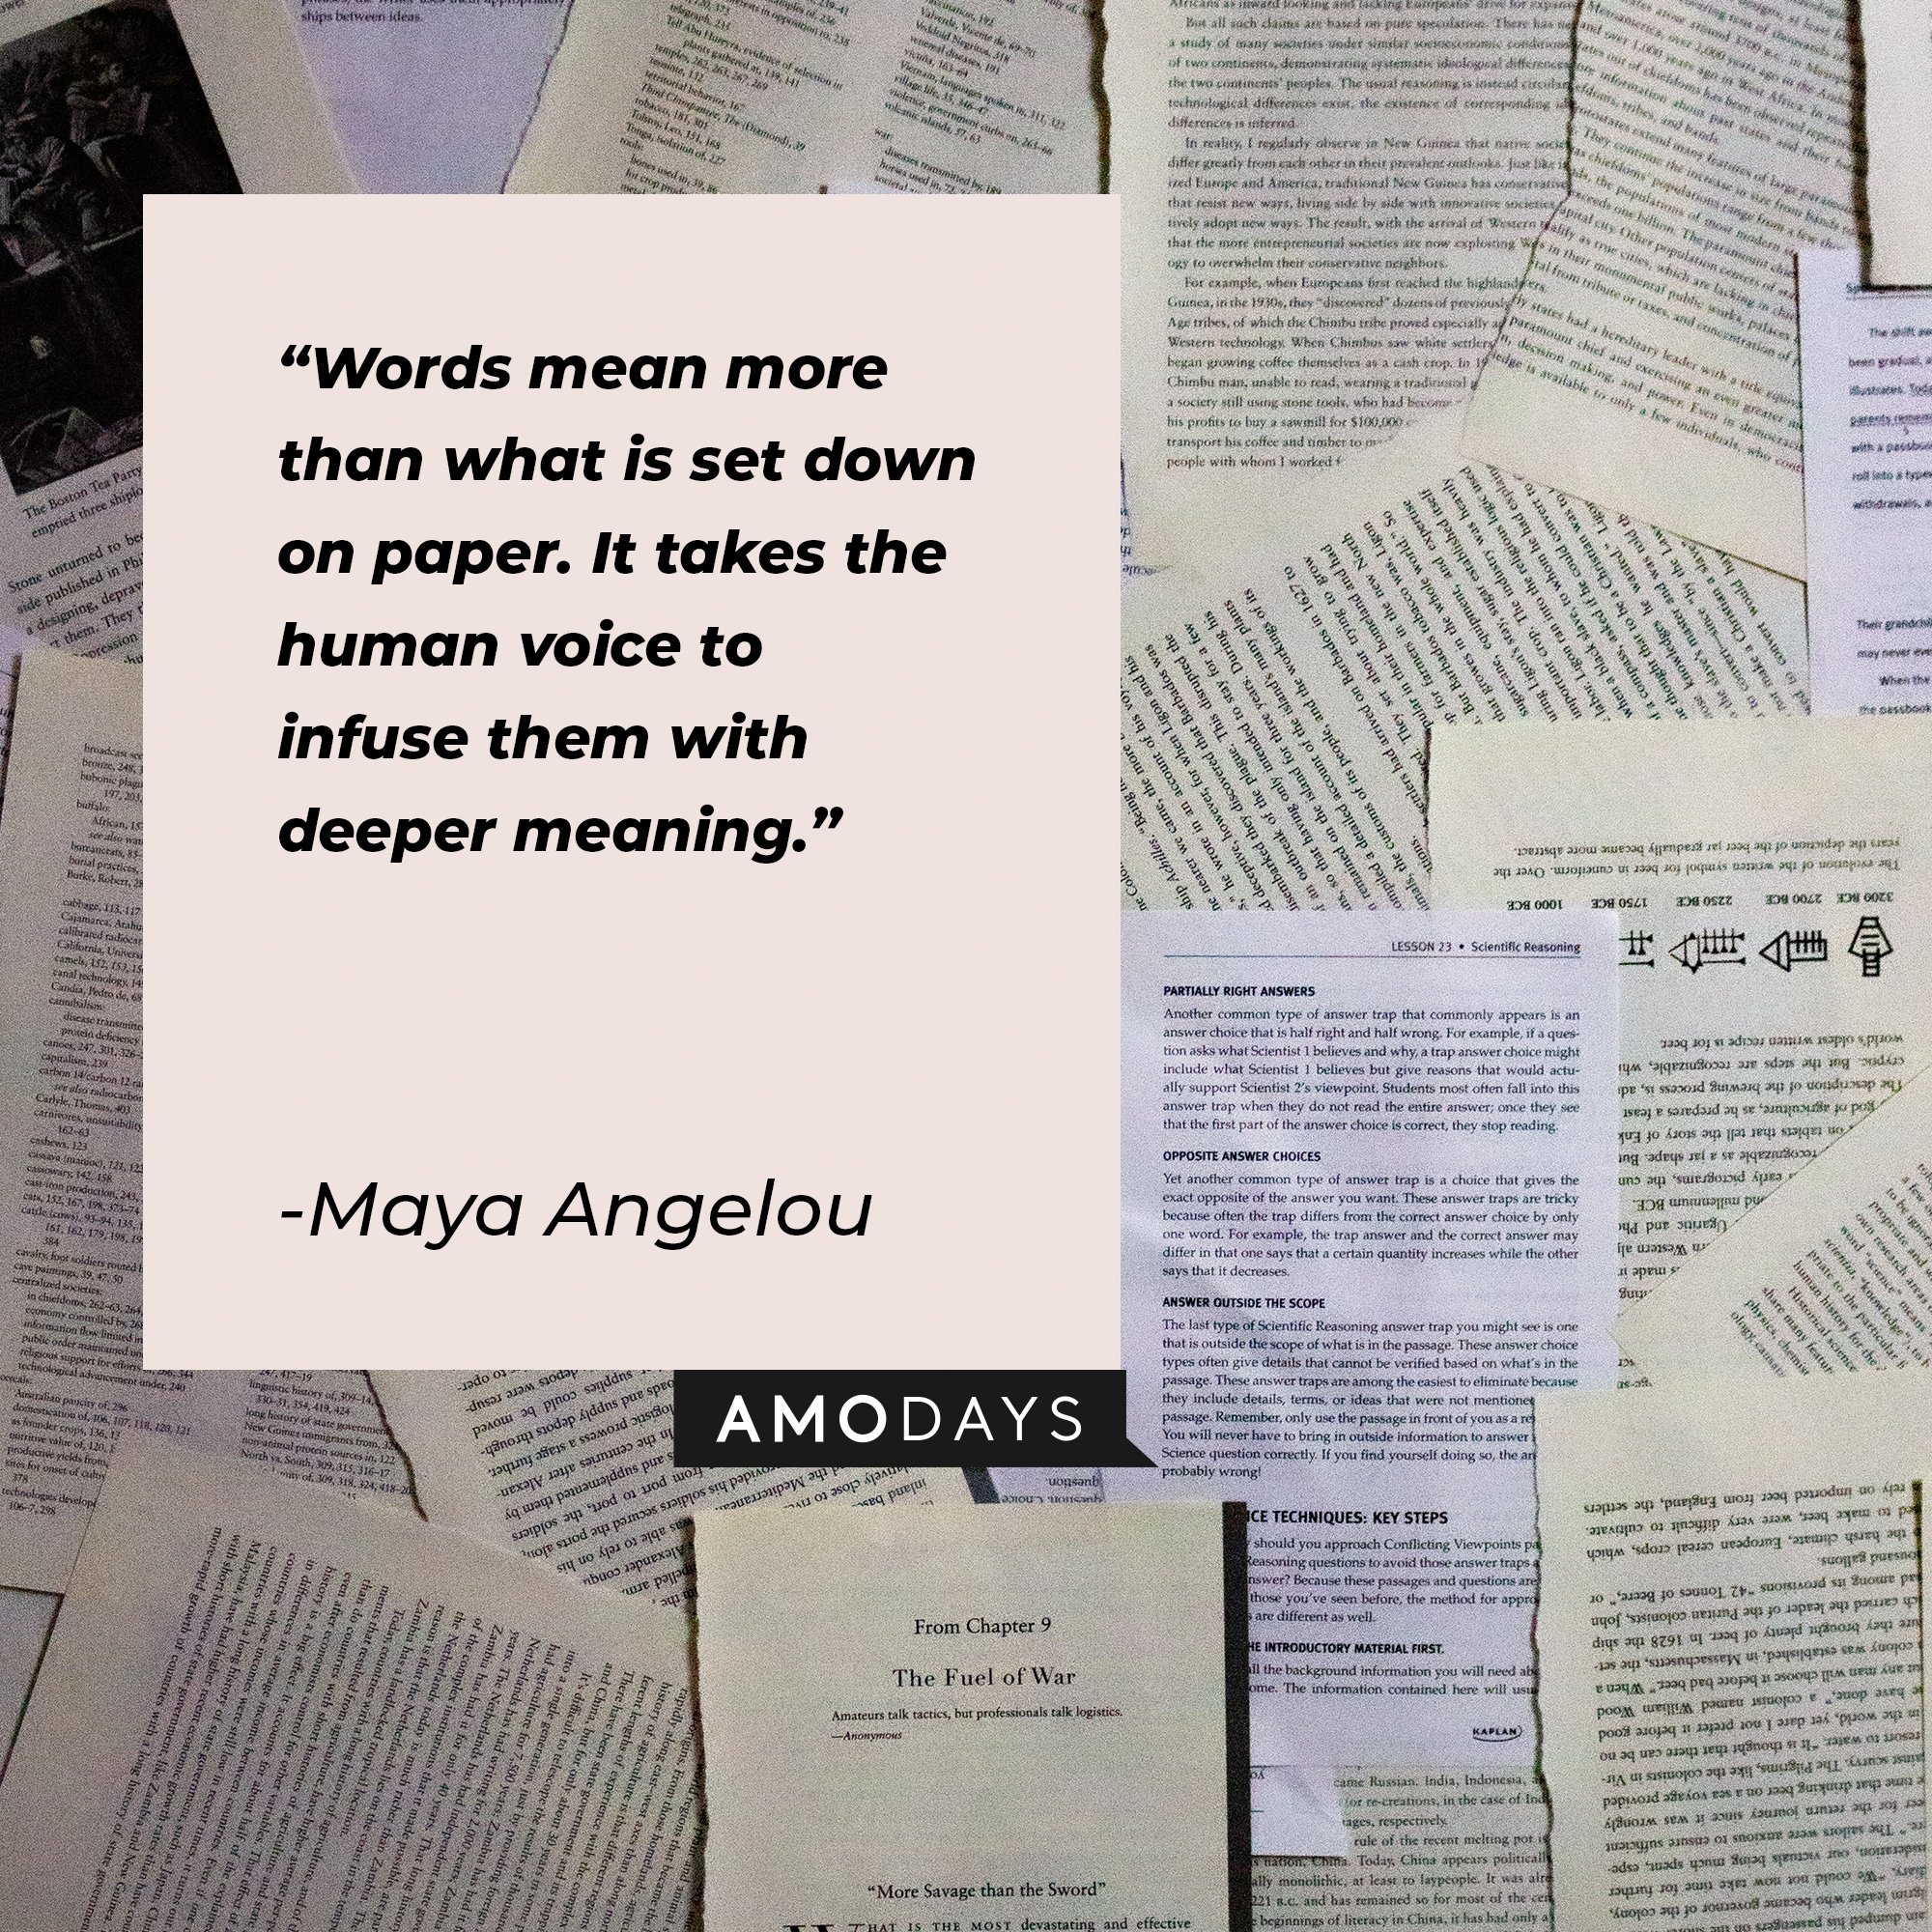  Maya Angelou’s quote: "Words mean more than what is set down on paper. It takes the human voice to infuse them with deeper meaning."  | Image: AmoDays